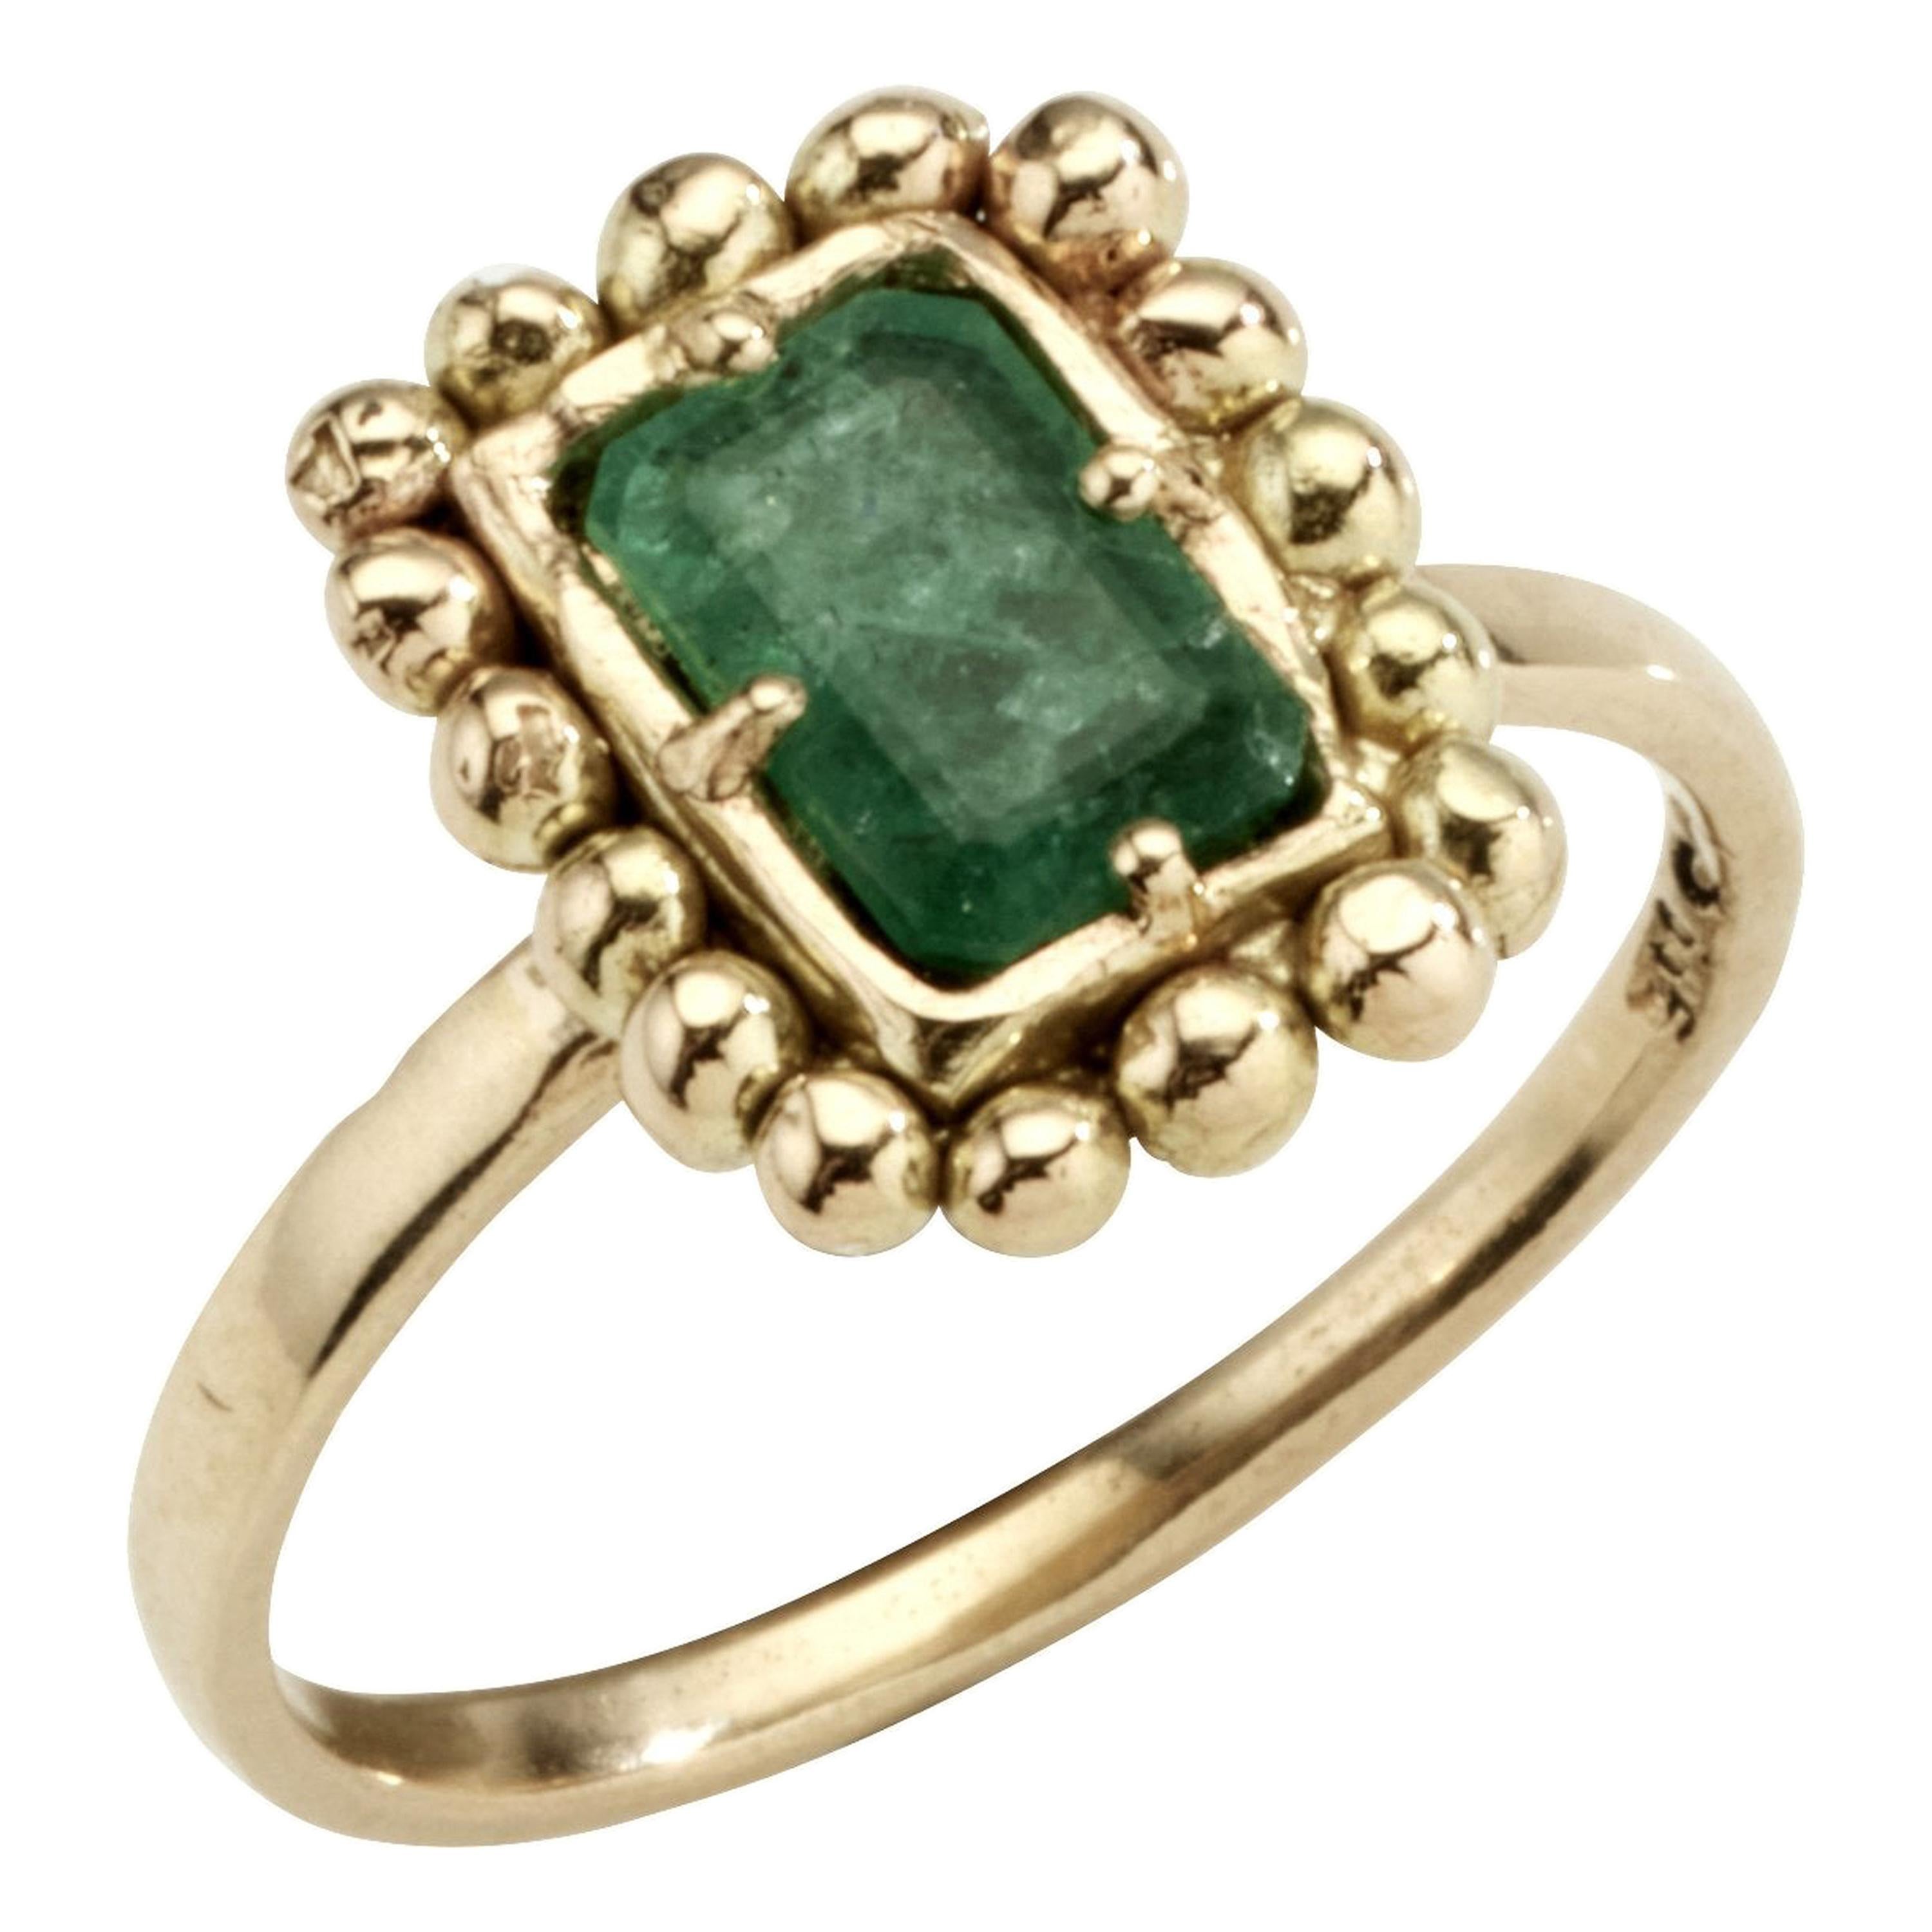 For Sale:  Solid 18k Yellow Gold Emerald Boudica Ring